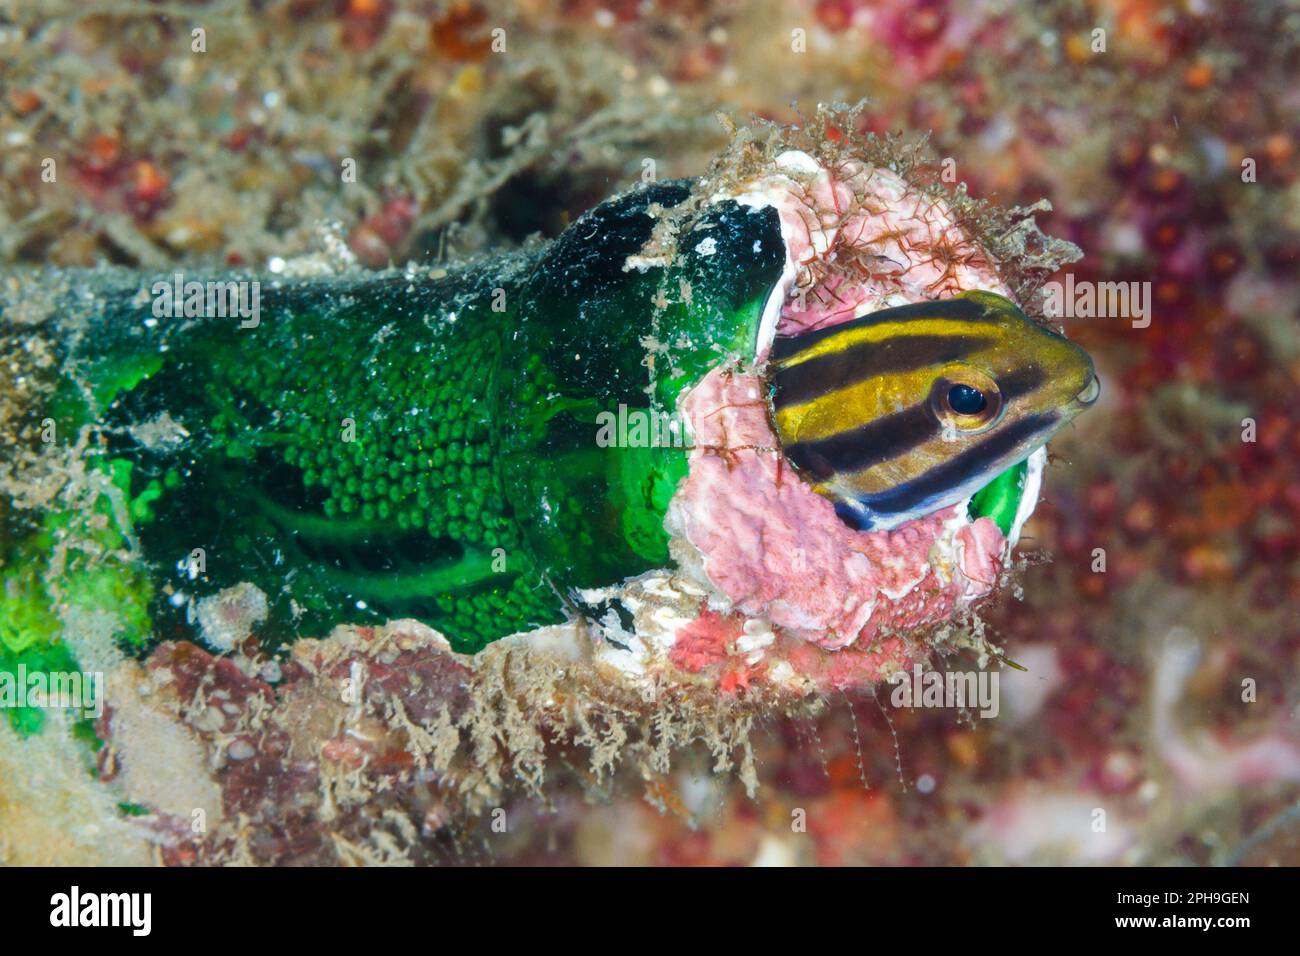 Striped fang blenny (Meiacanthus grammistes) living inside a bottle where its eggs can be seen.  Lembeh Strait, North Sulawesi, Indonesia. Stock Photo